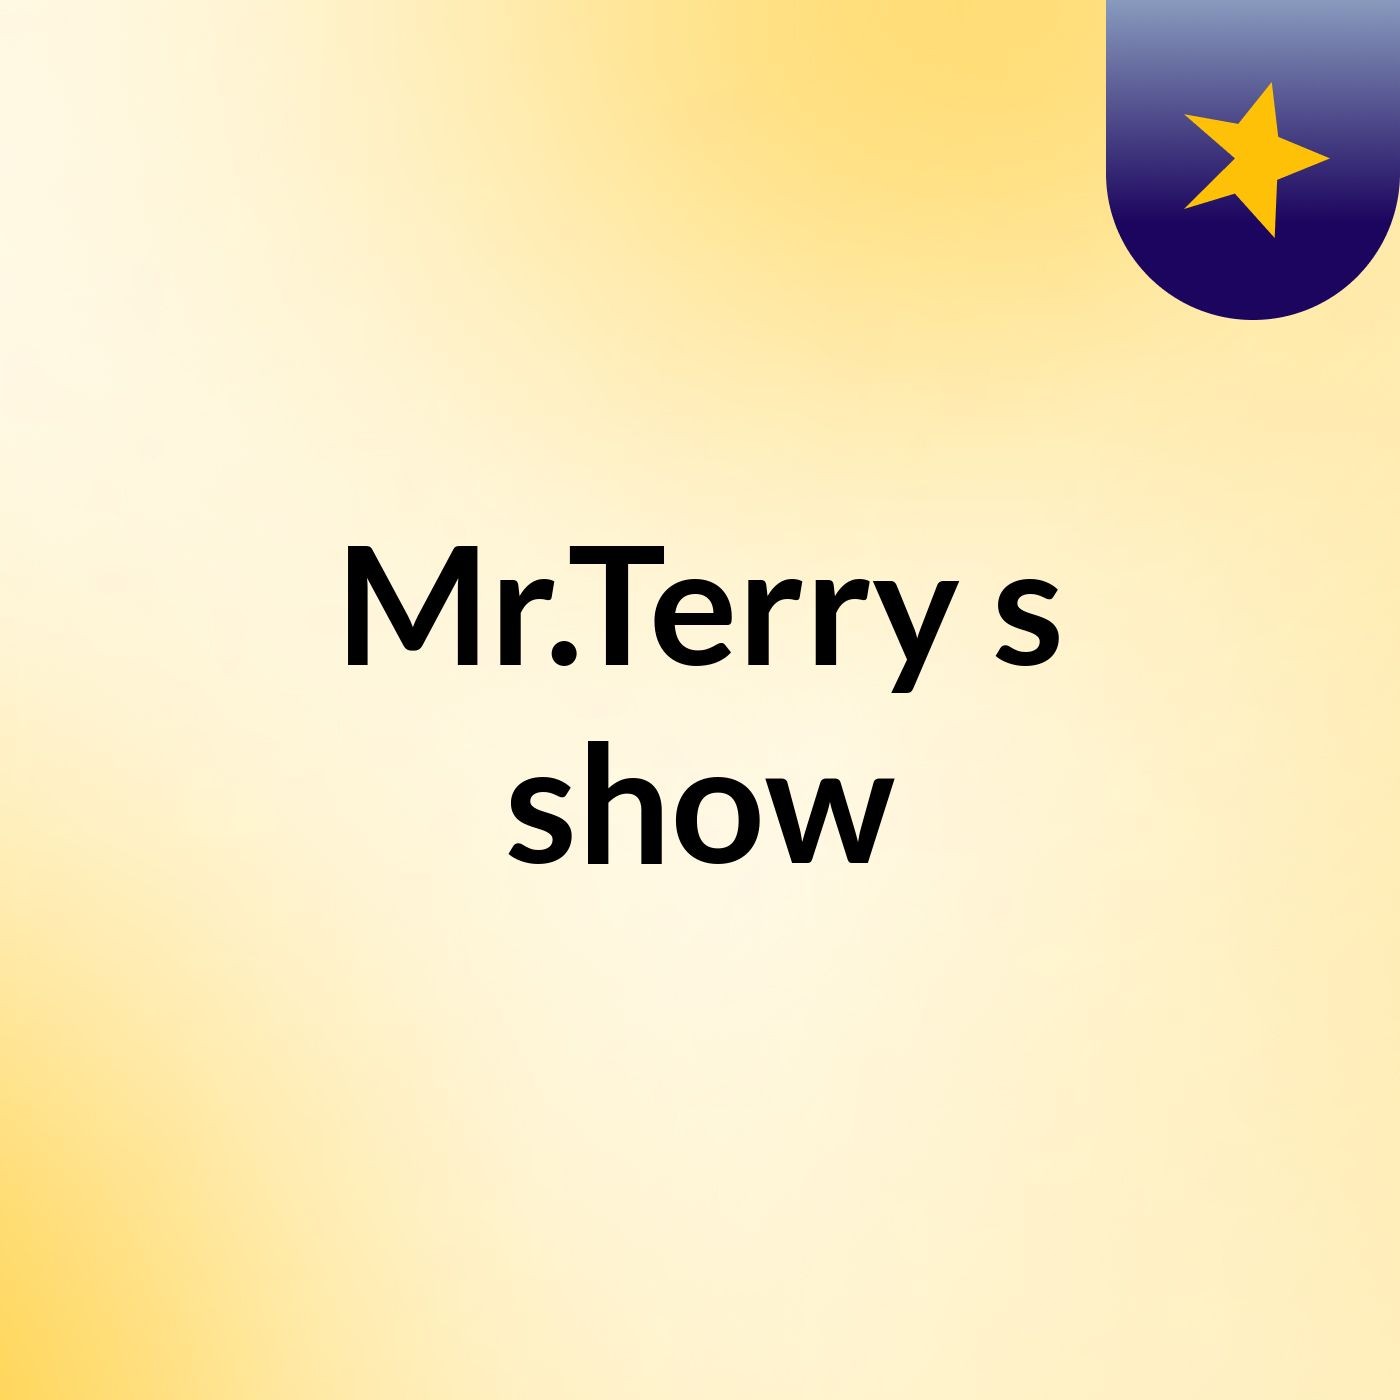 Mr.Terry's show